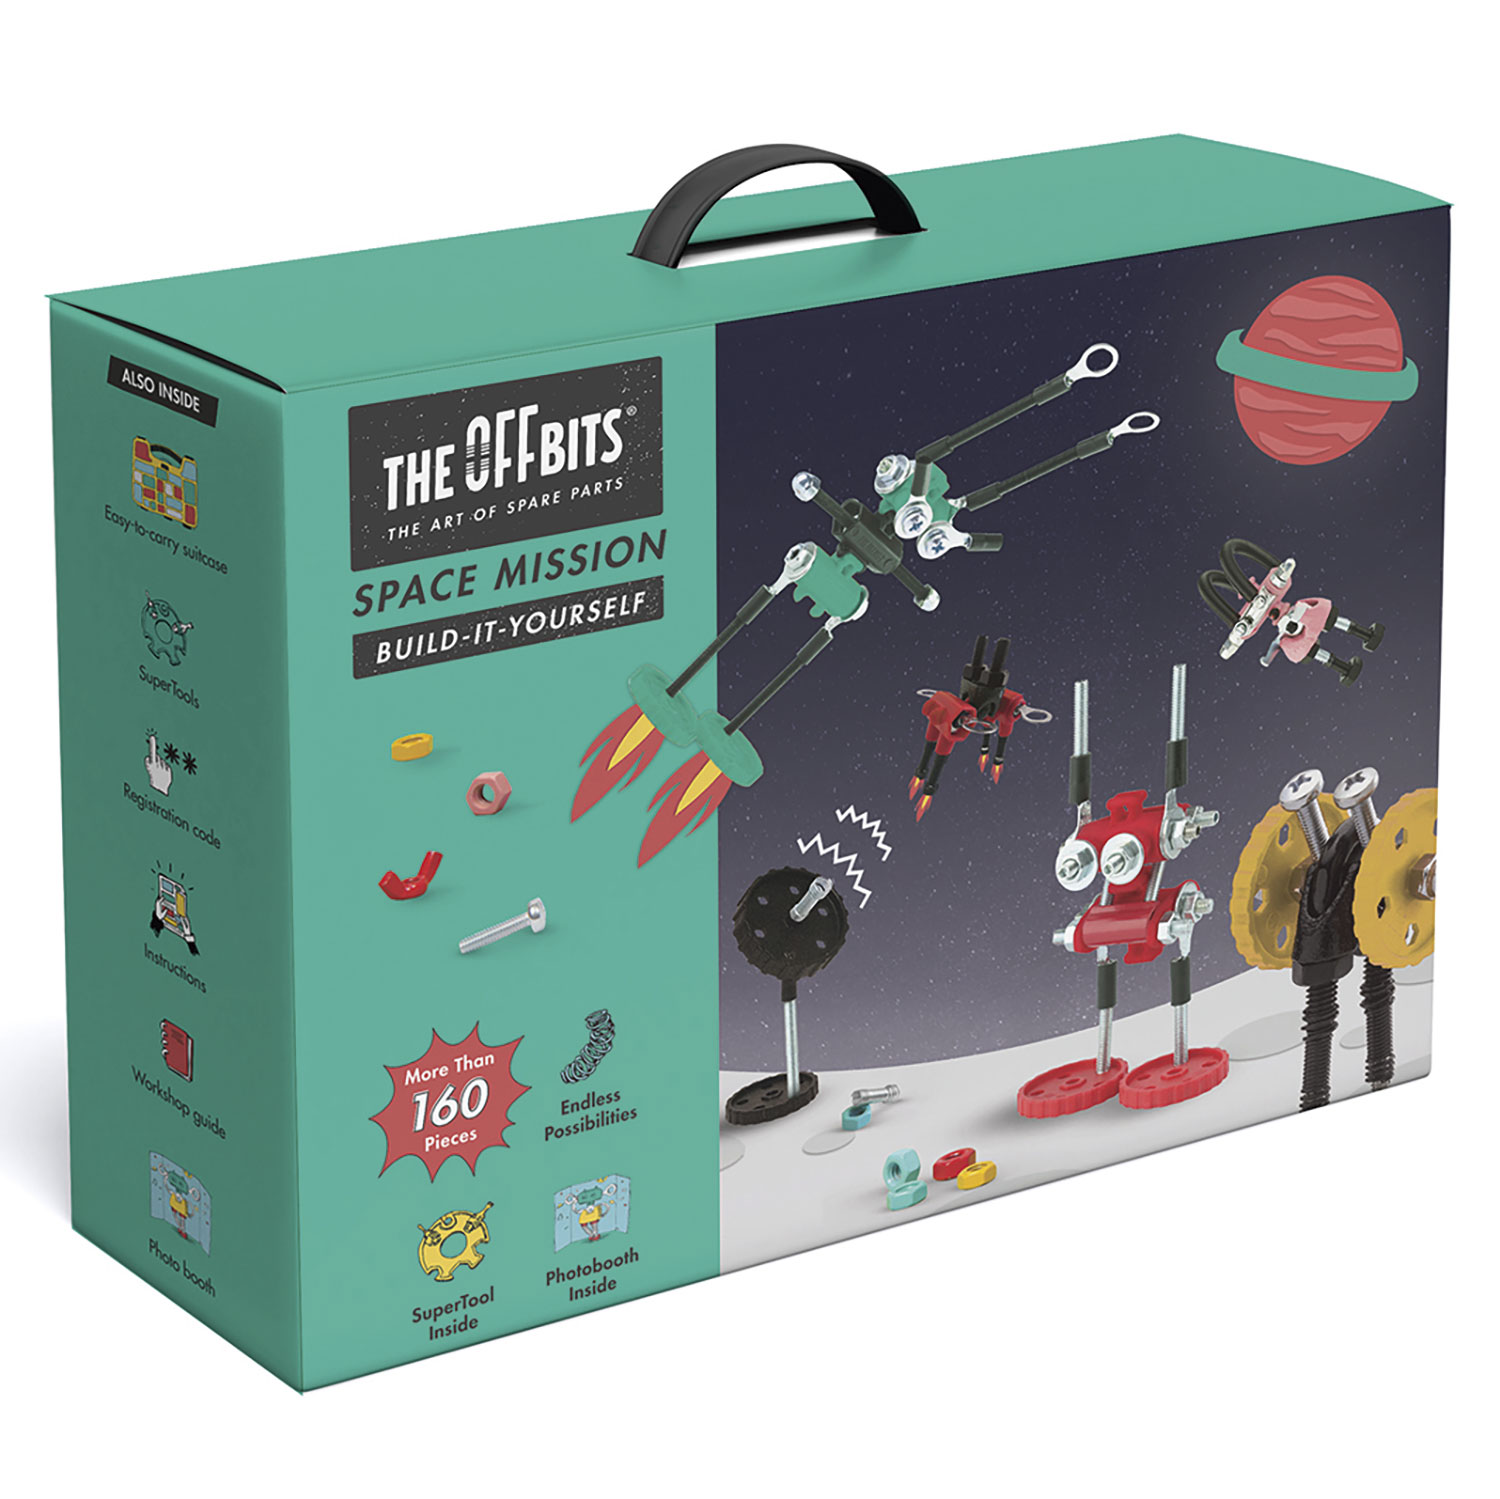 Space mission, suitcase pack more than 150 parts